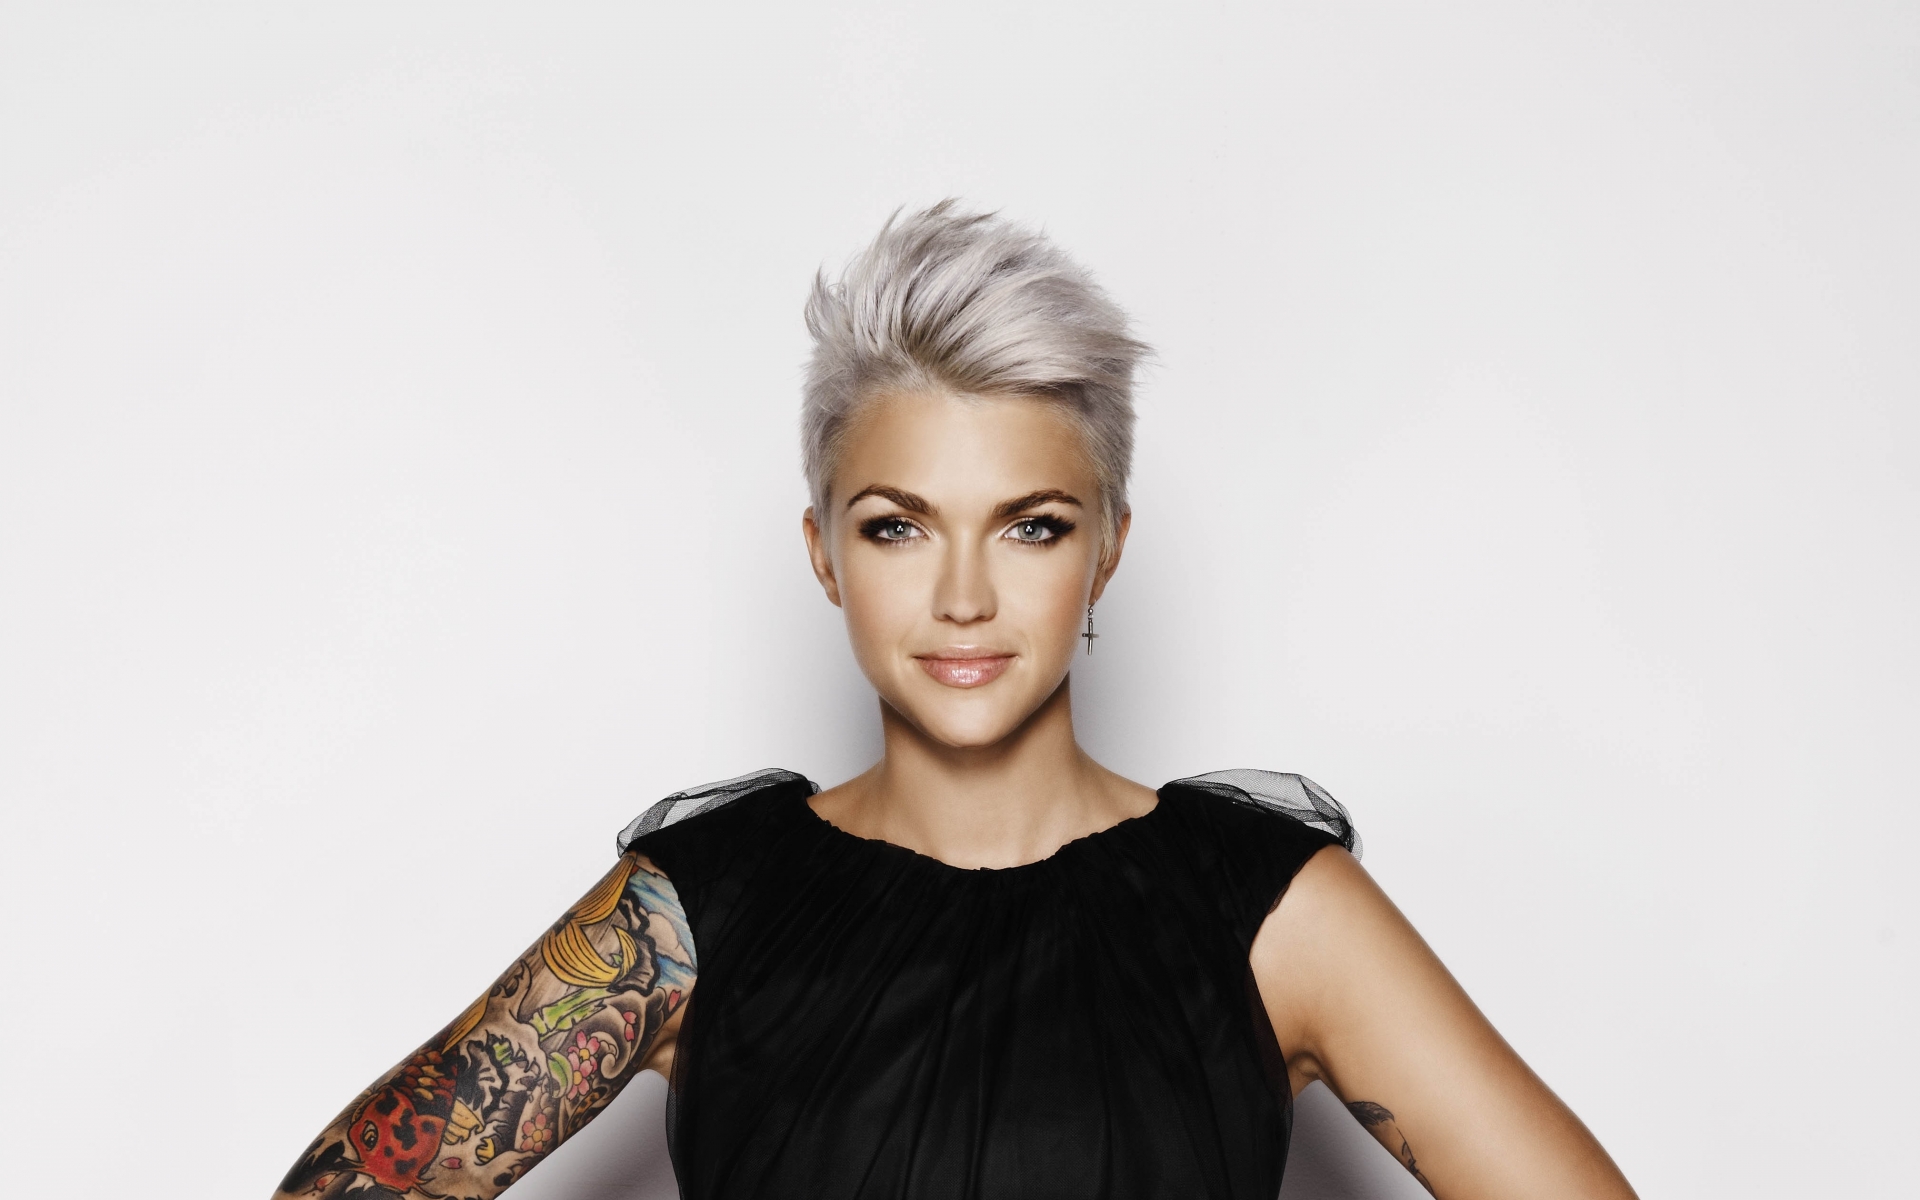 Wallpaper ID 386757  Celebrity Ruby Rose Phone Wallpaper  1080x1920  free download